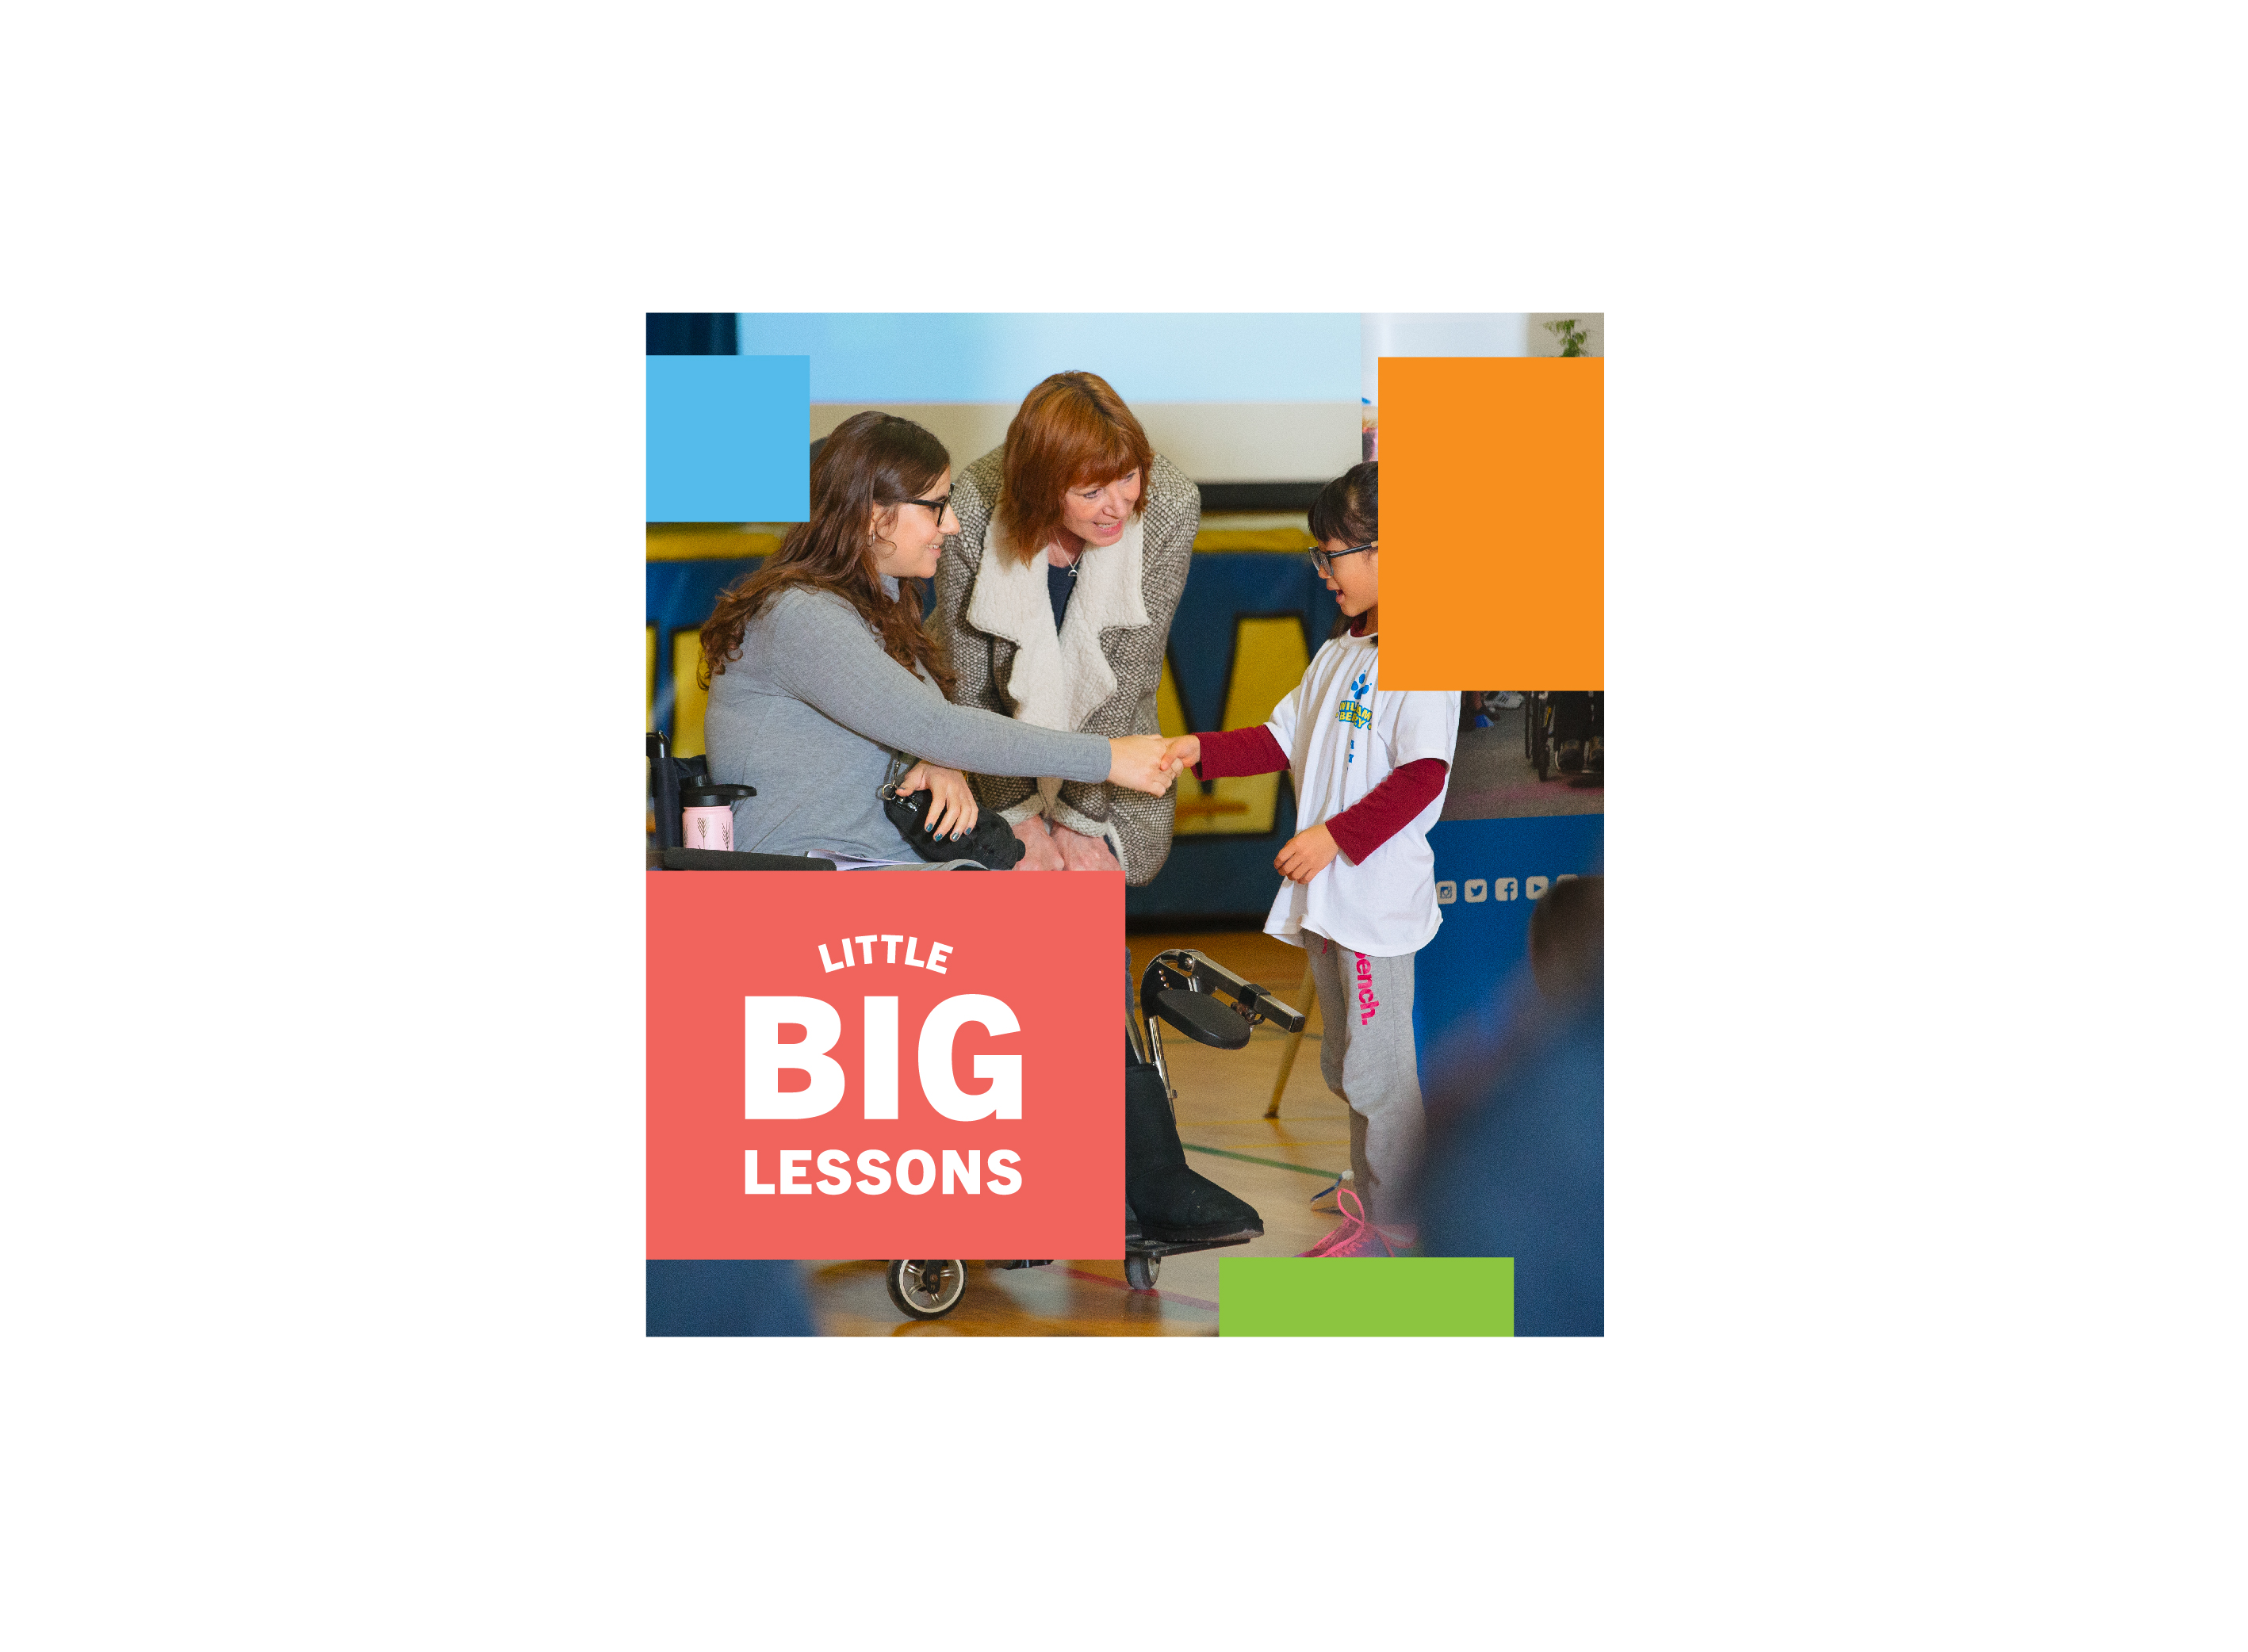 A Rick Hansen Foundation Ambassador that uses a wheelchair greeting and shaking hands with a young girl at an Elementary school Assembly - a school staff member is also smiling at the girl. Little Big Lessons logo text.